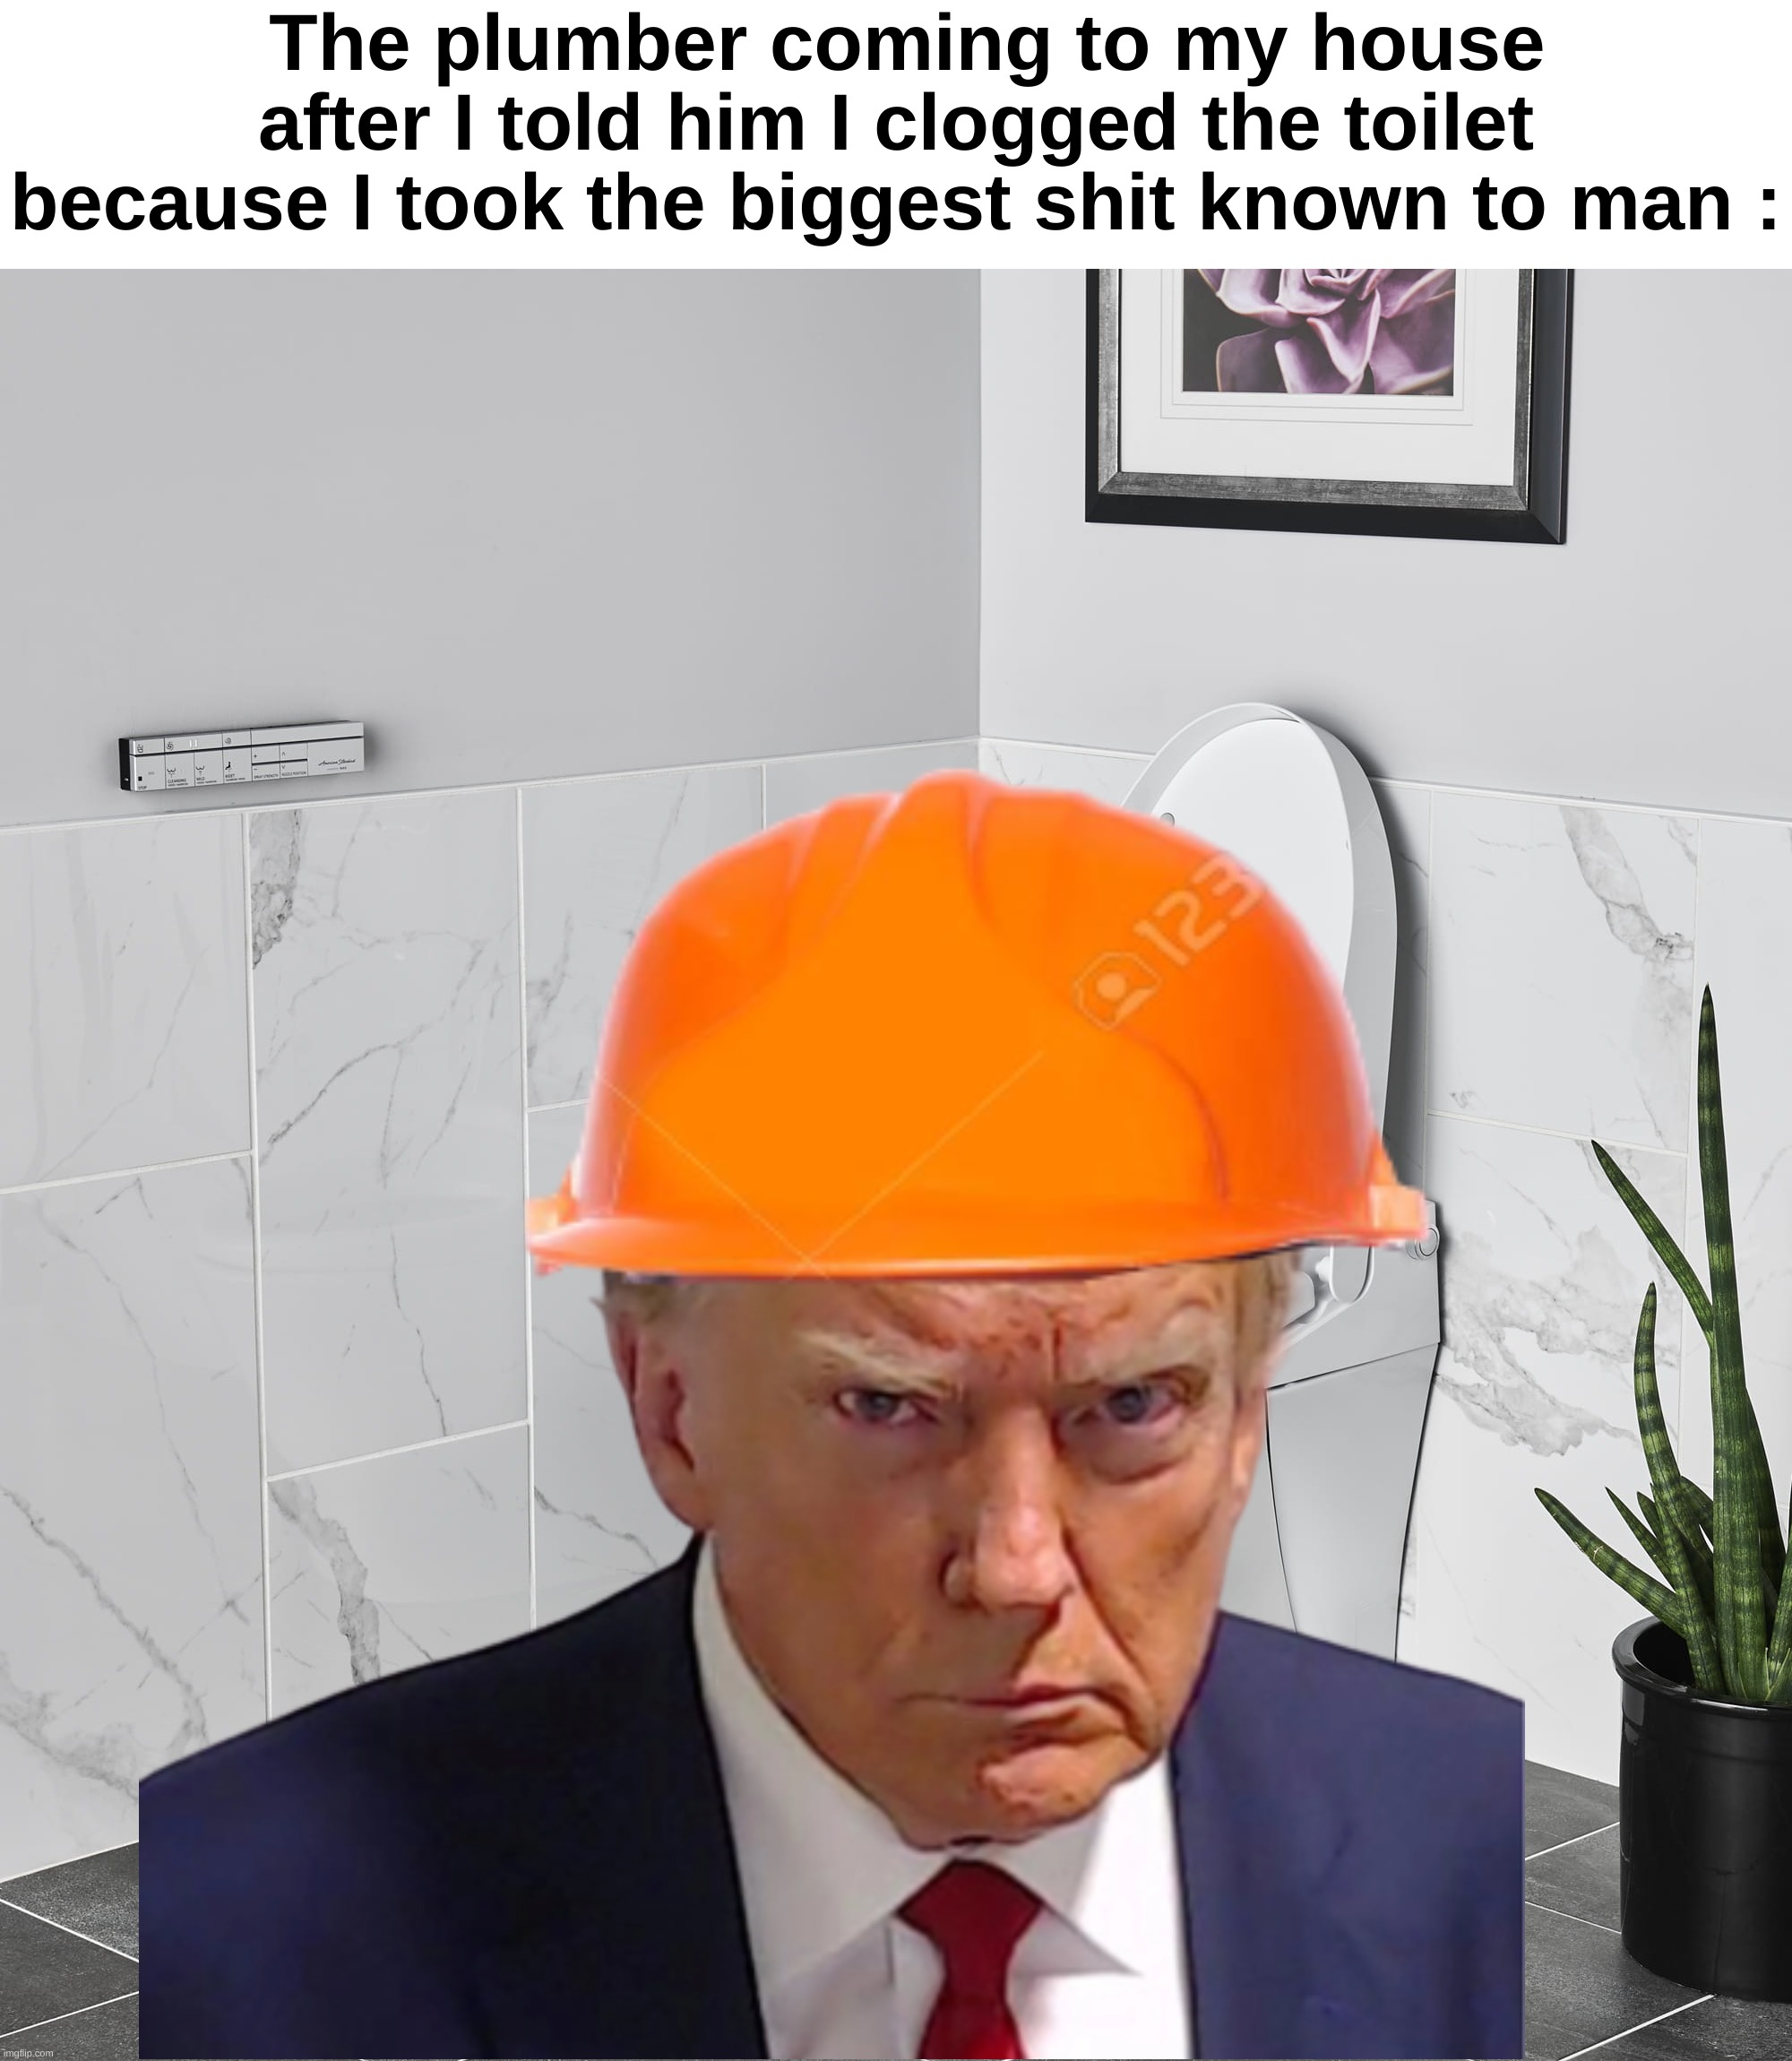 Mods, Don't mark this nsfw. It's only moderate swearing | The plumber coming to my house after I told him I clogged the toilet because I took the biggest shit known to man : | image tagged in memes,funny,plumber,trump,poo,front page plz | made w/ Imgflip meme maker